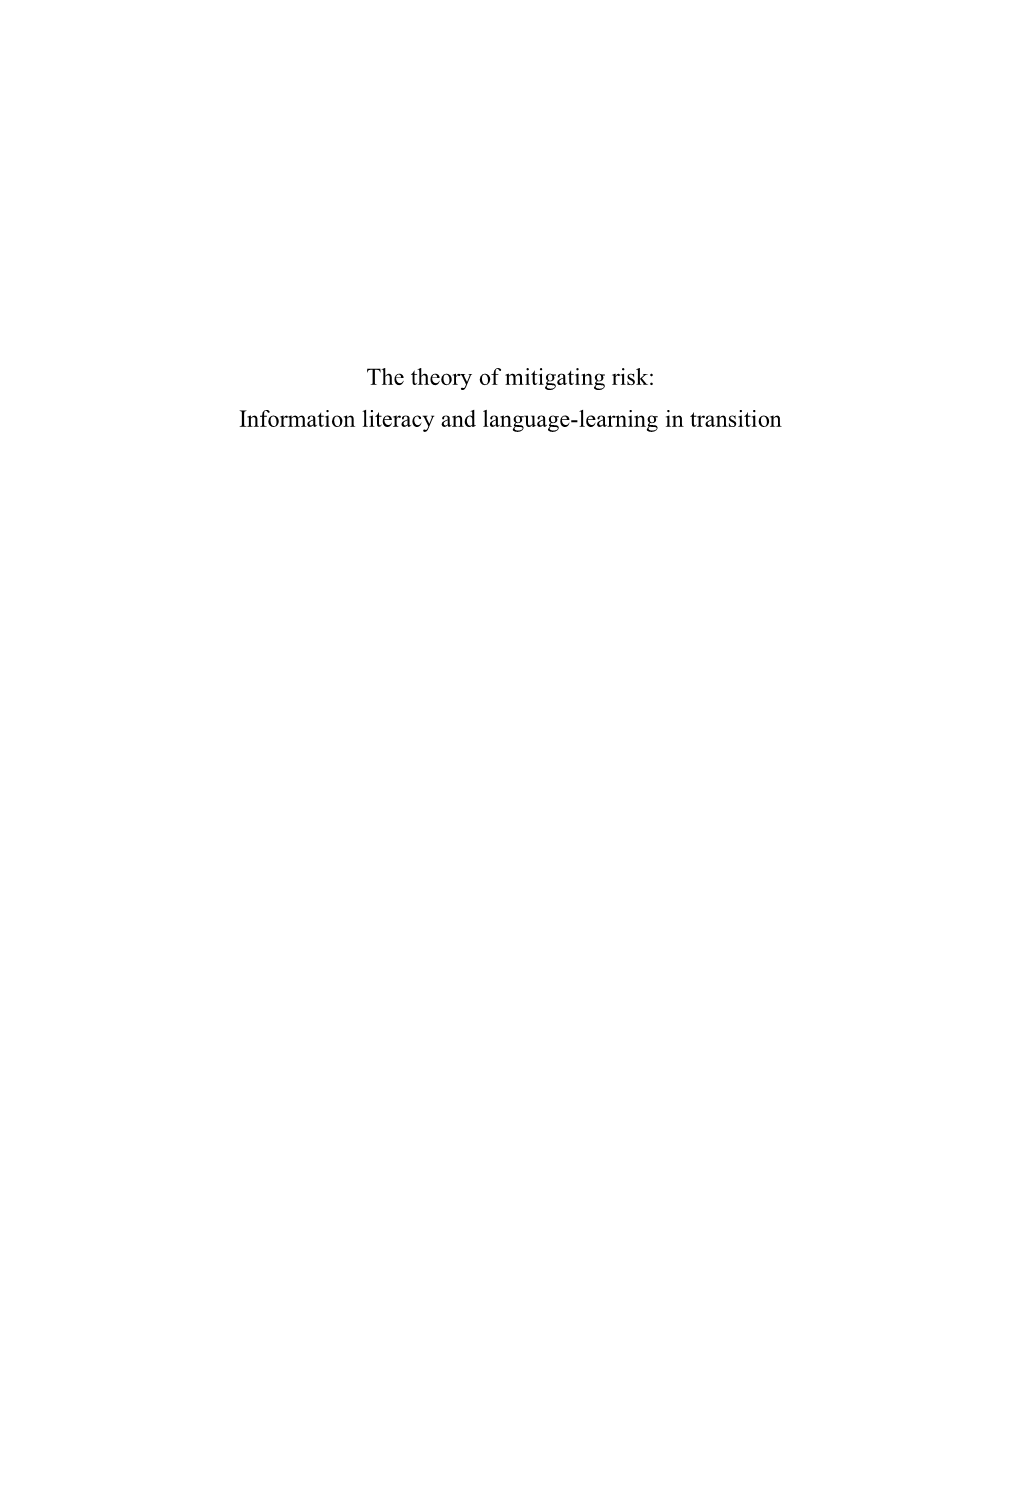 The Theory of Mitigating Risk: Information Literacy and Language-Learning in Transition